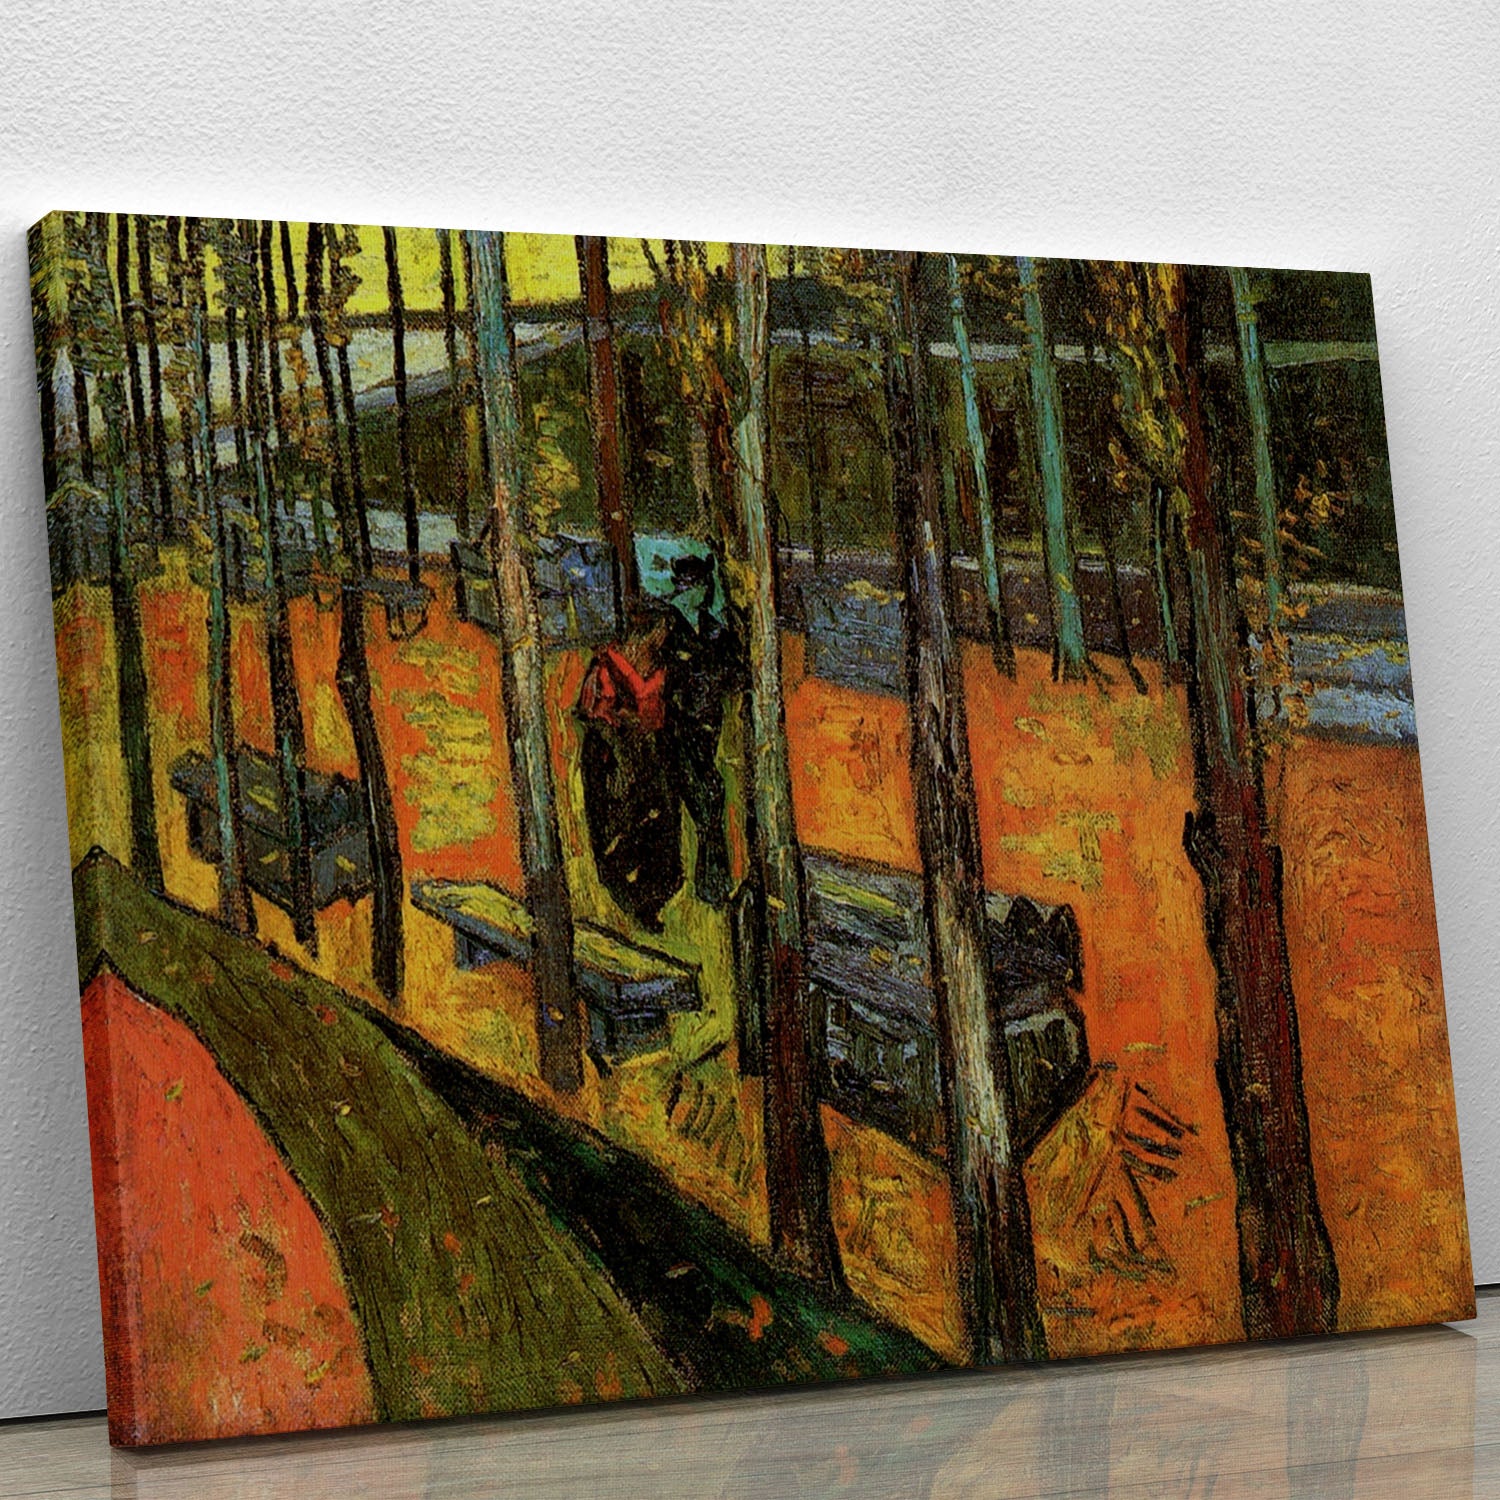 Les Alyscamps 2 by Van Gogh Canvas Print or Poster - Canvas Art Rocks - 1